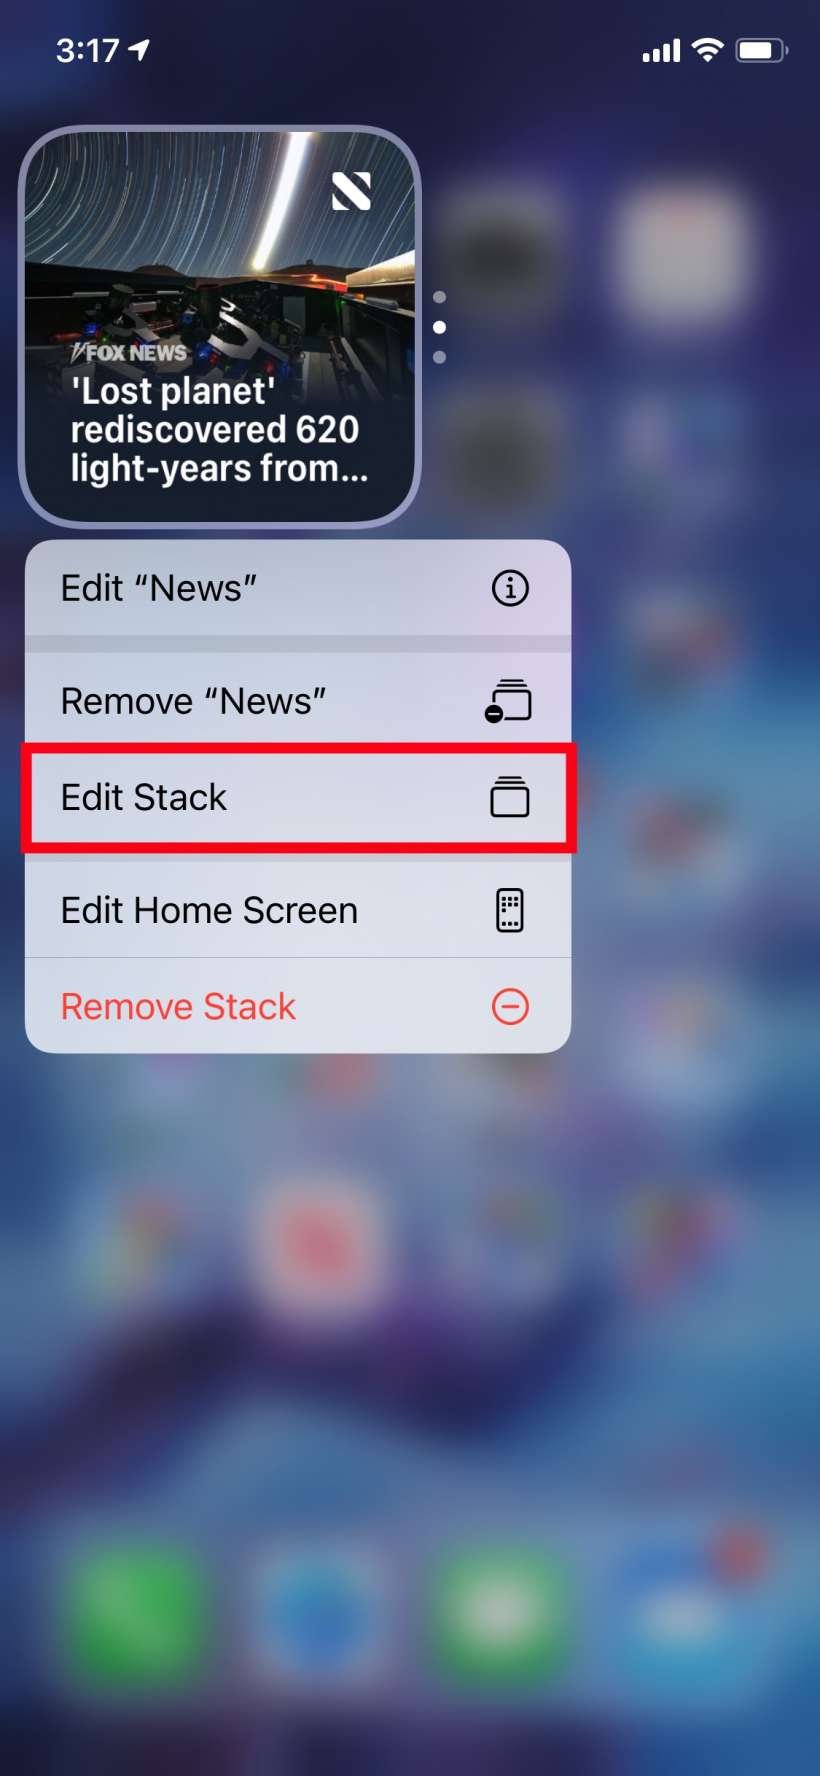 How to edit smart stacks on iPhone and iPad.